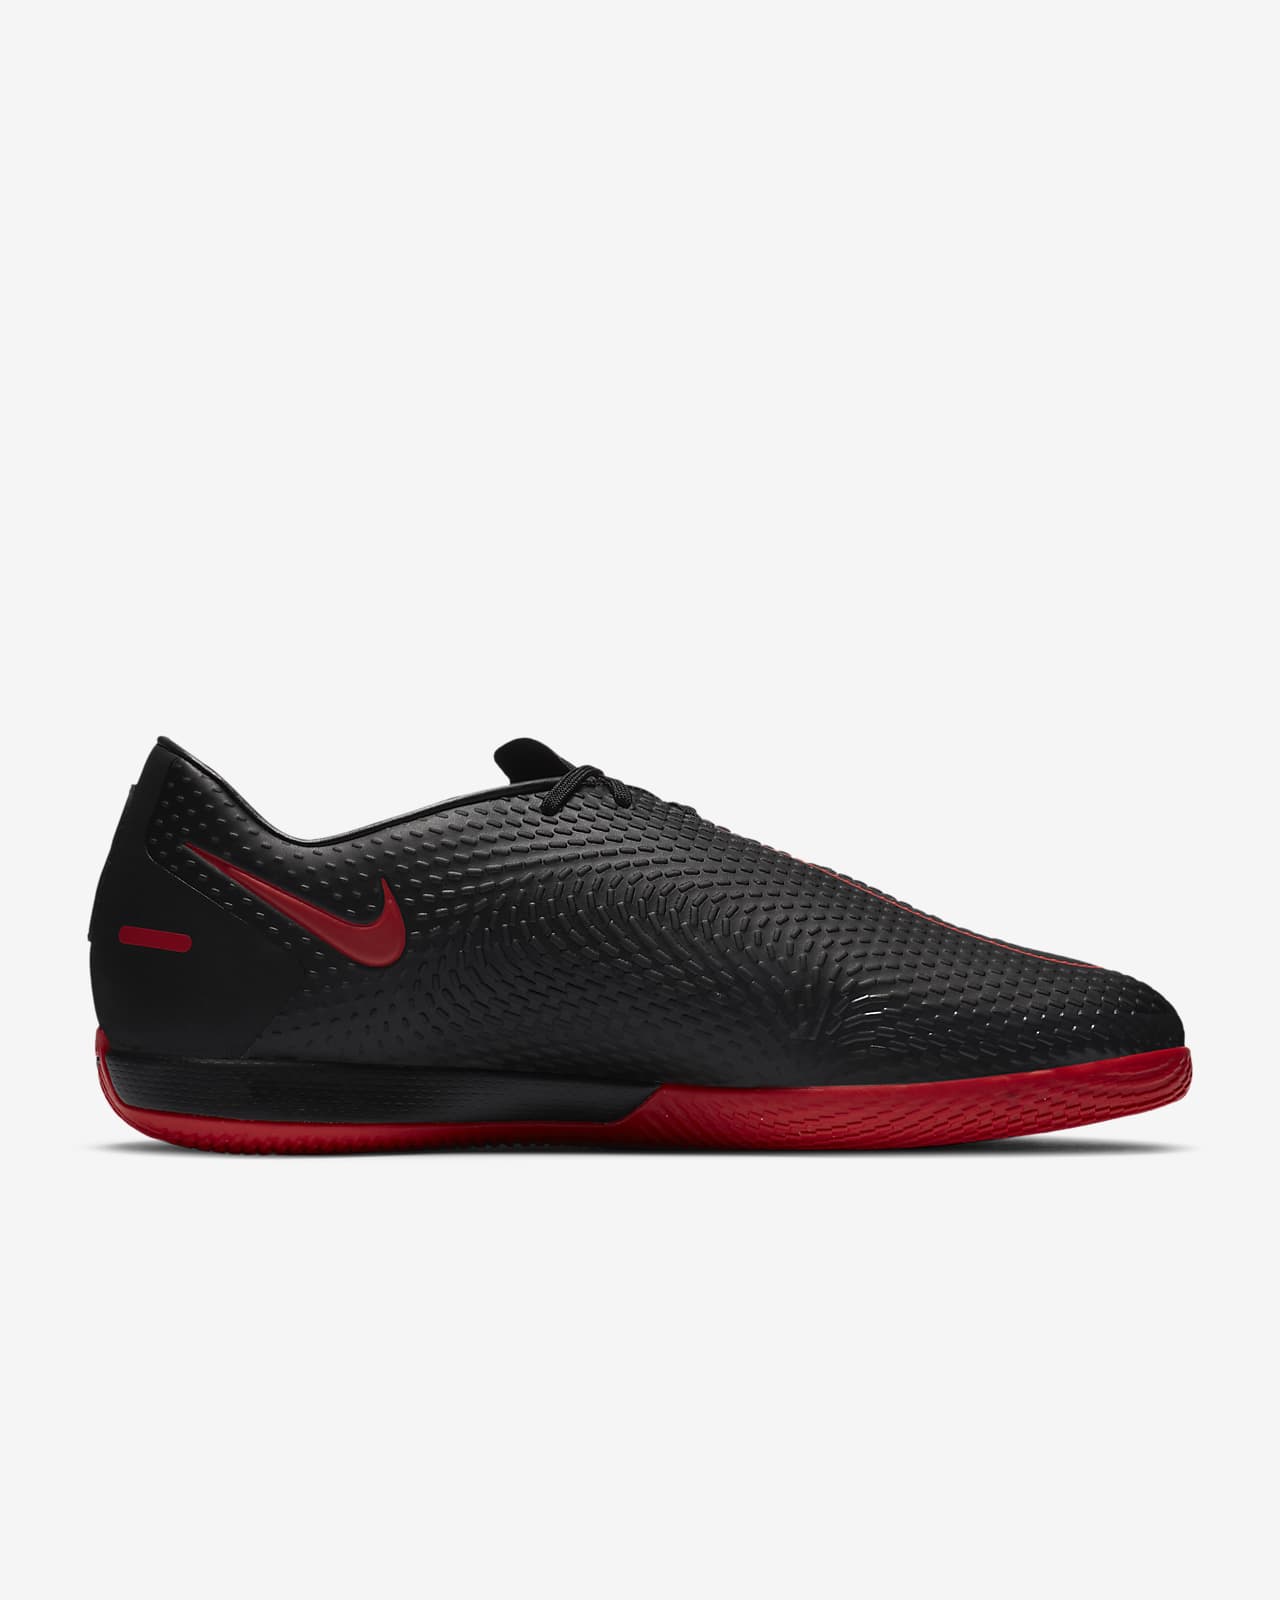 nike shoes soccer